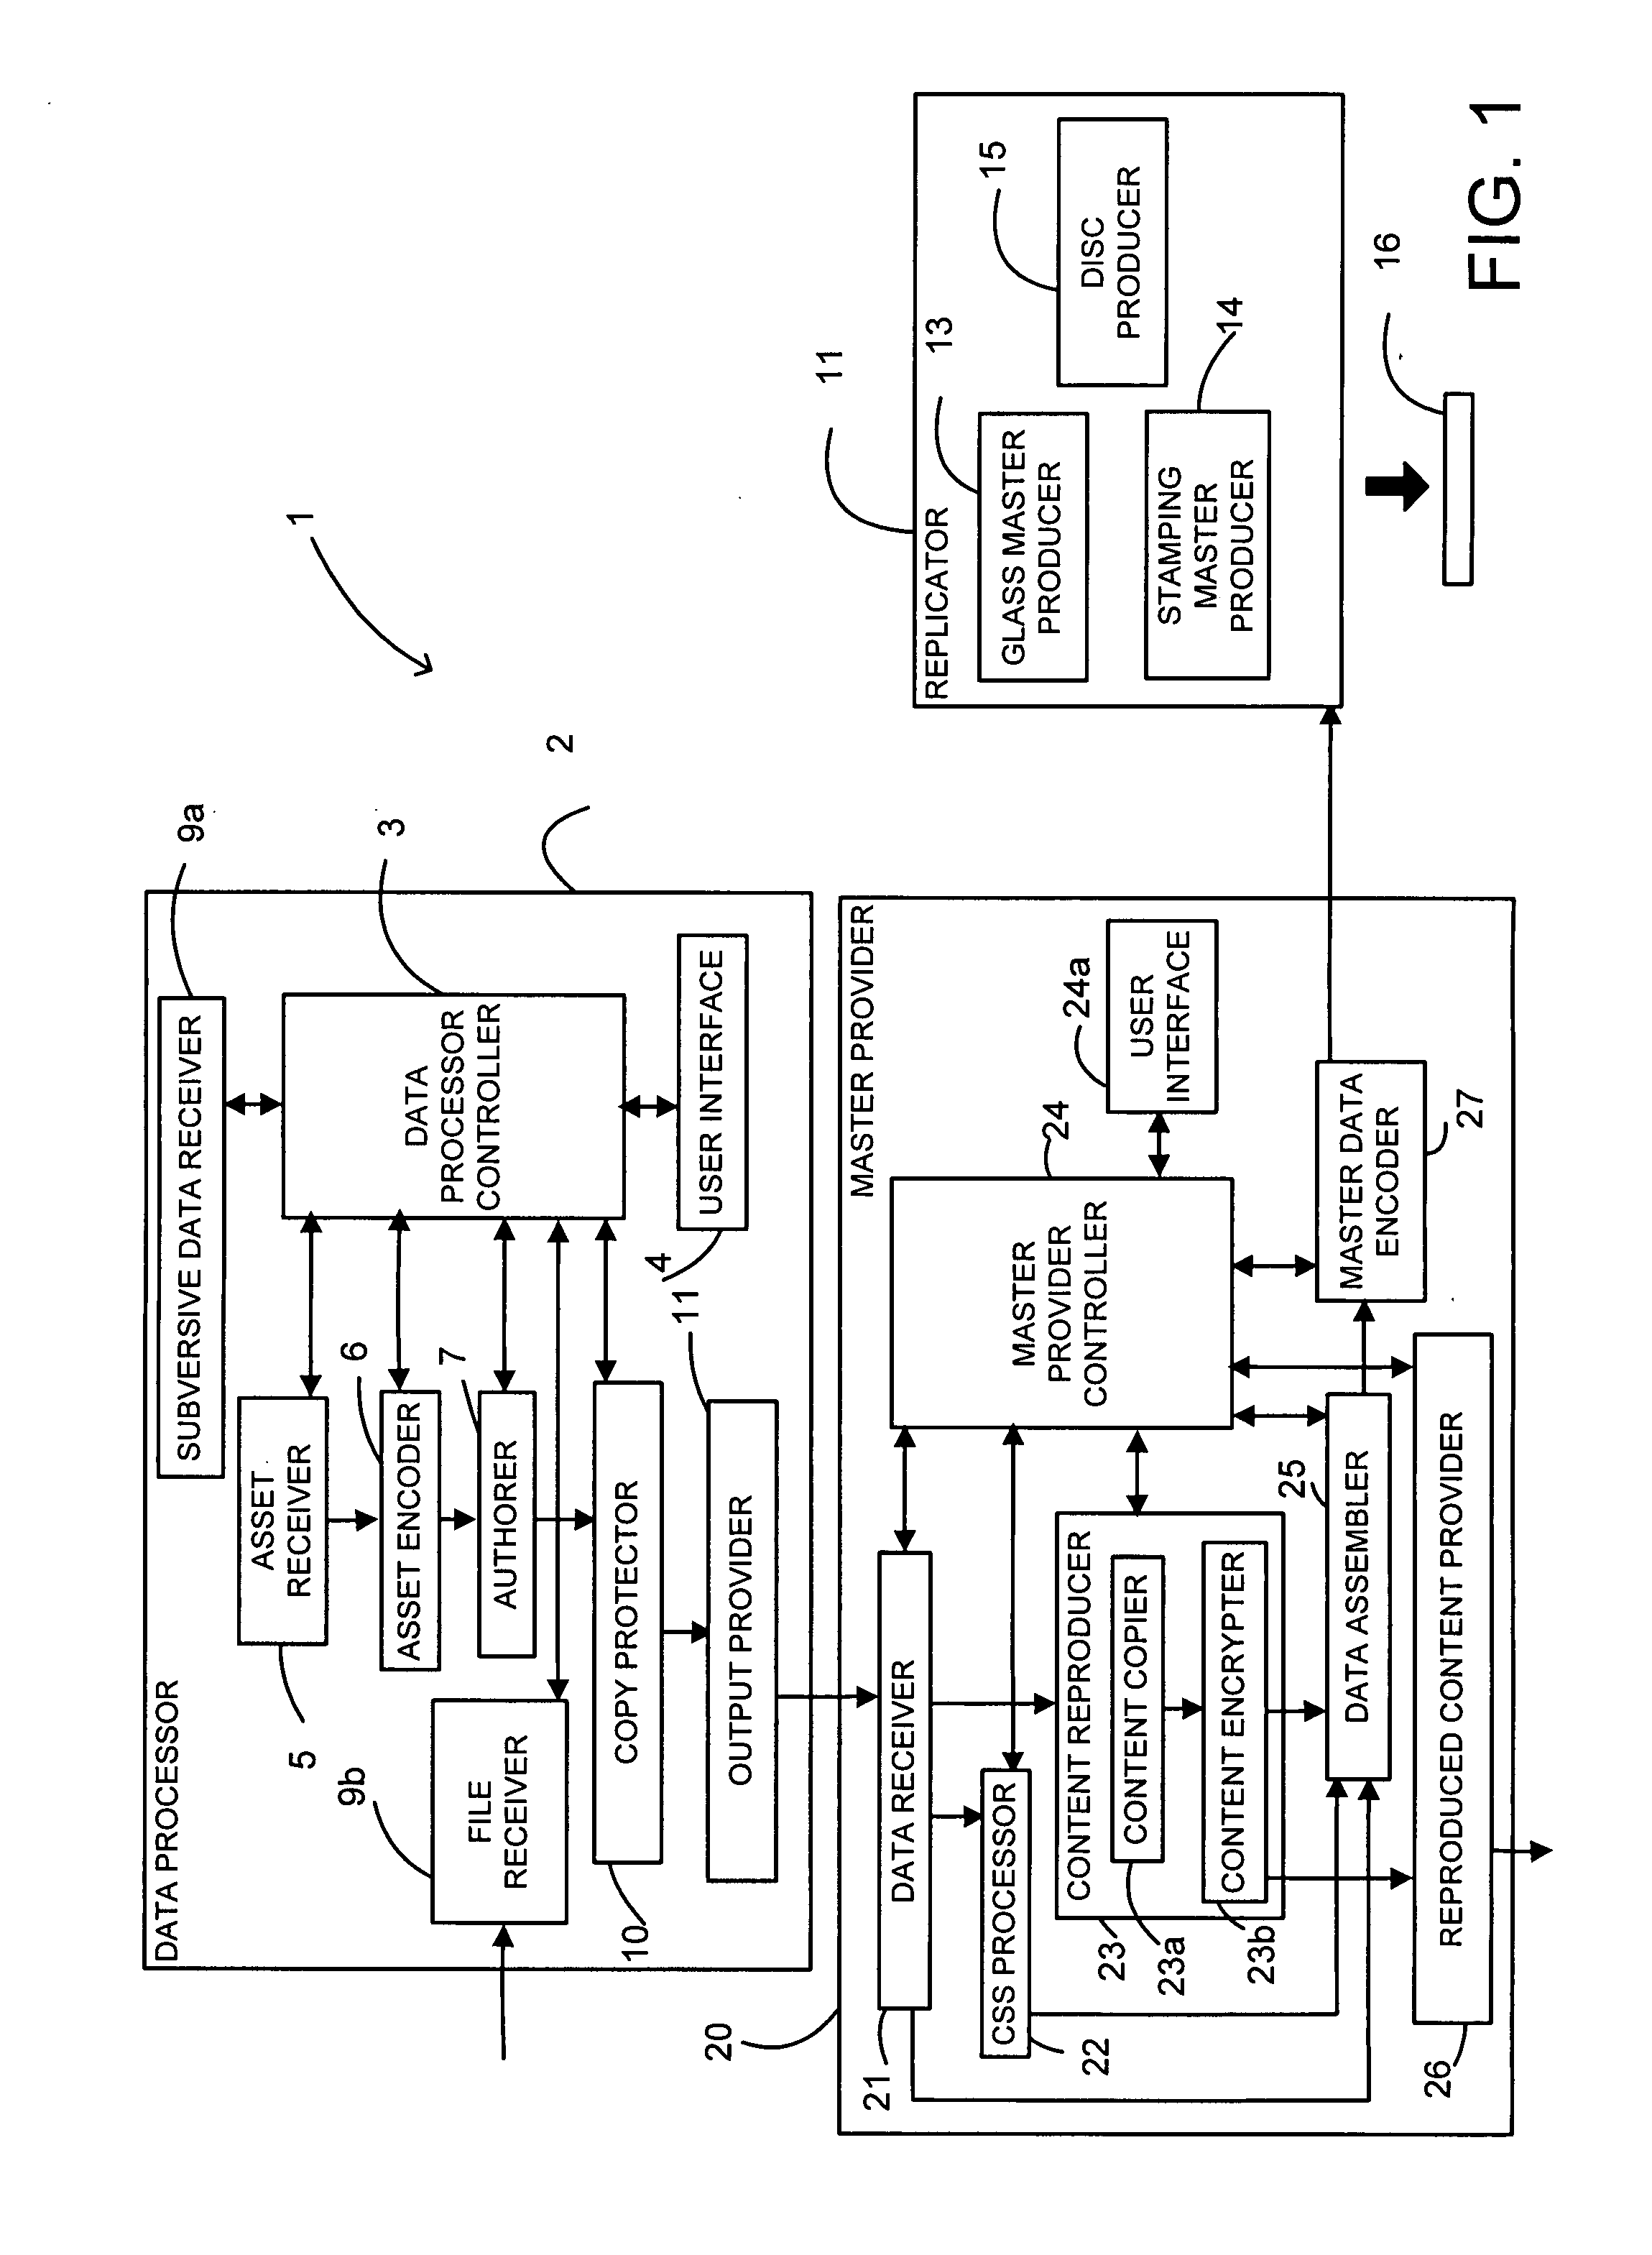 Apparatus for and a method of providing content data